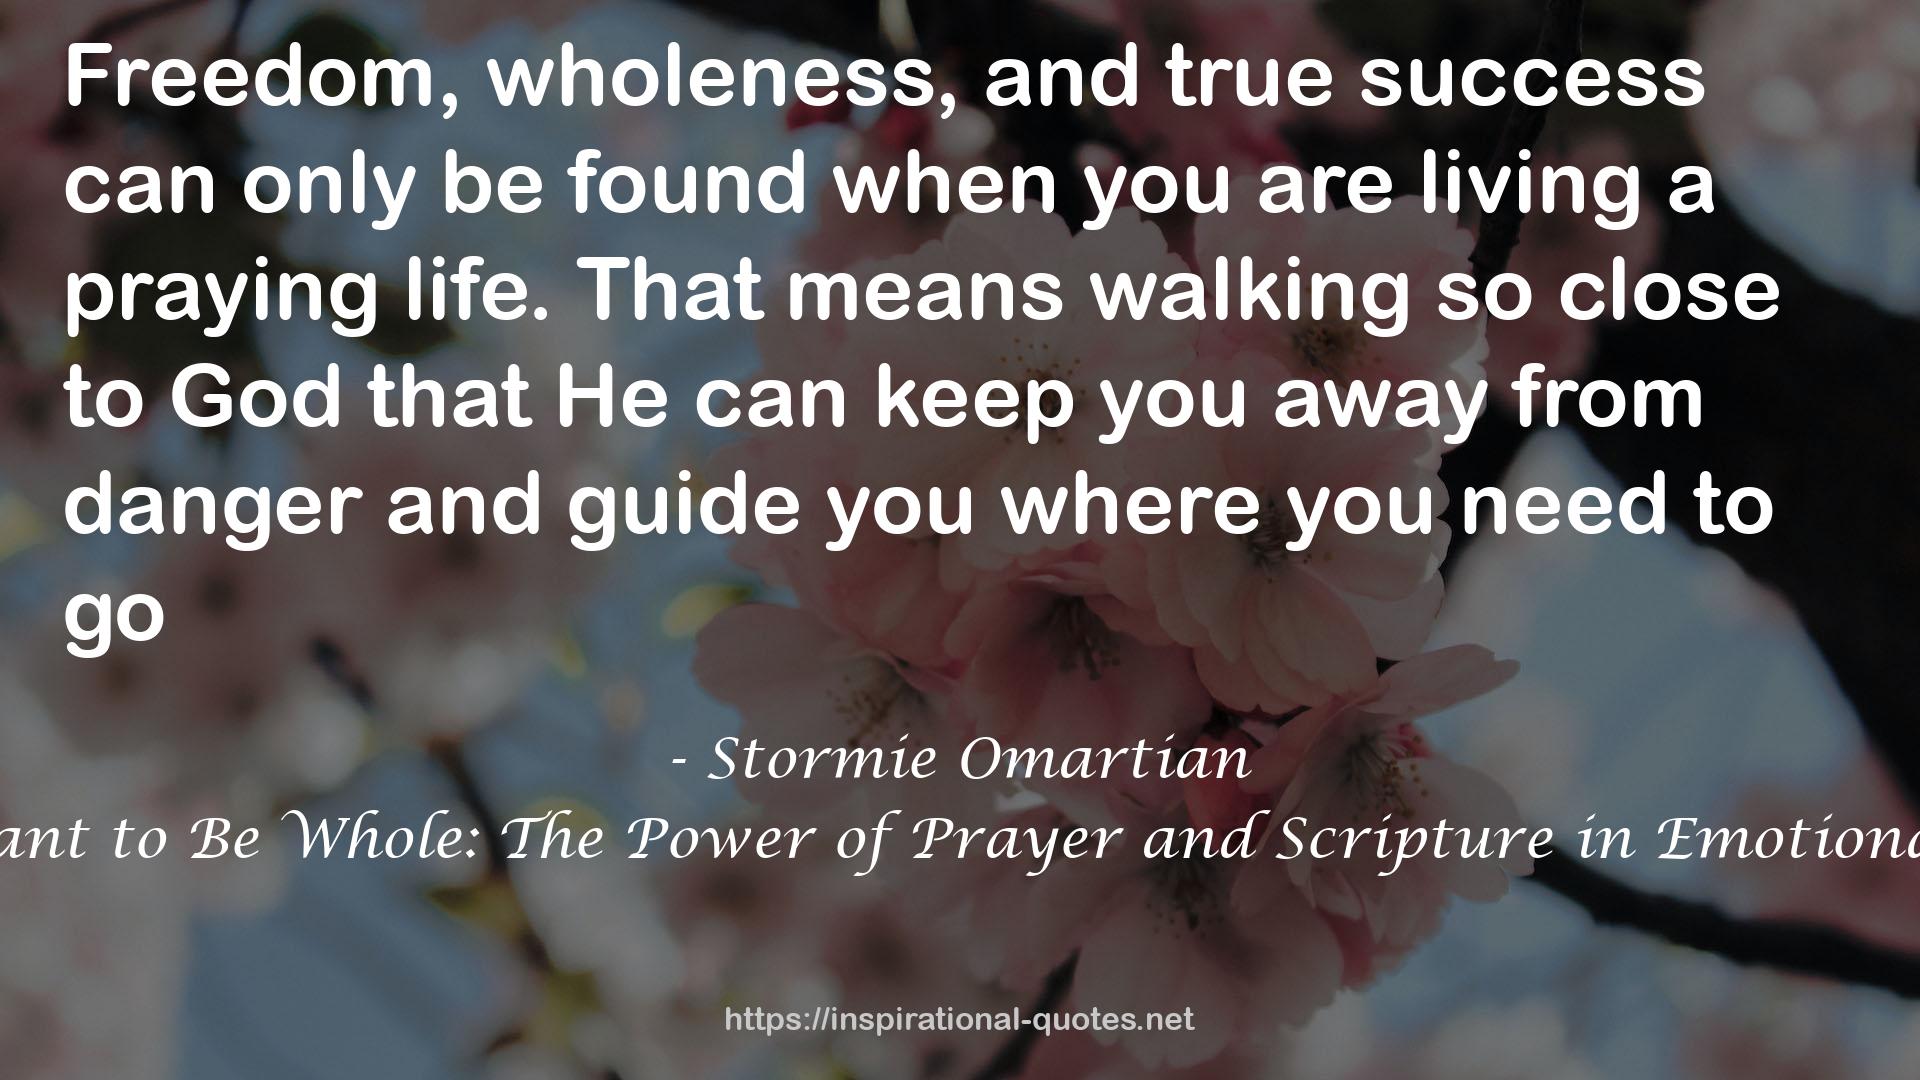 Lord, I Want to Be Whole: The Power of Prayer and Scripture in Emotional Healing QUOTES